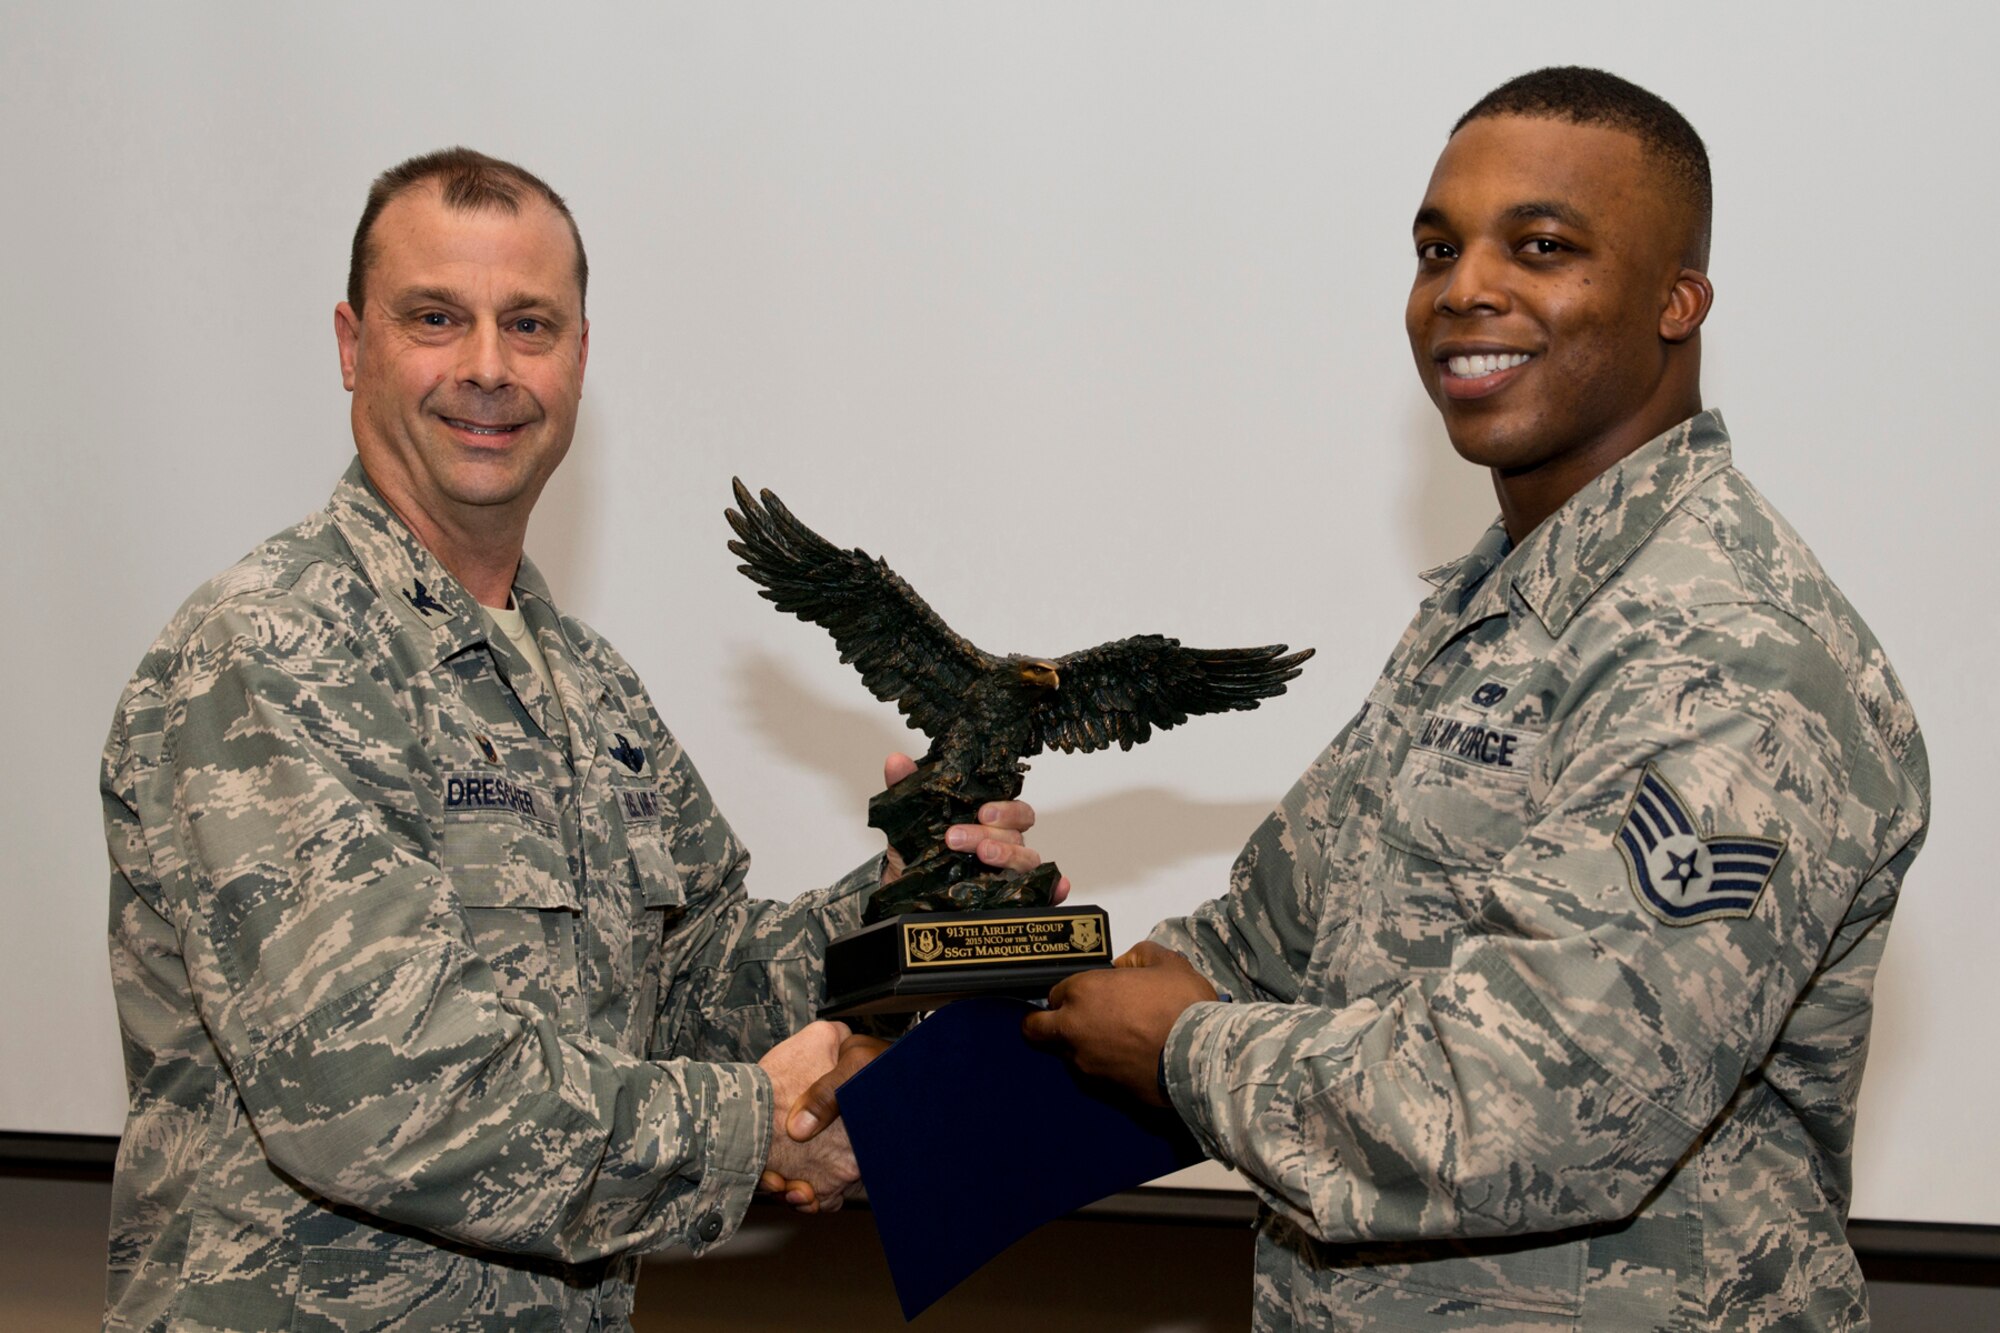 U.S. Air Force Reserve Col. Craig Drescher, commander, 913th Airlift Group, and Staff Sgt. Marquice Combs, a crew chief assigned to the 913th Maintenance Squadron, pose for a photo during a commander’s call at Little Rock Air Force Base, Ark., Mar. 13, 2016. Combs was presented the 2015 Non-commissioned Officer of the Year award for the 913 AG. (U.S. Air Force photo by Master Sgt. Jeff Walston/Released)